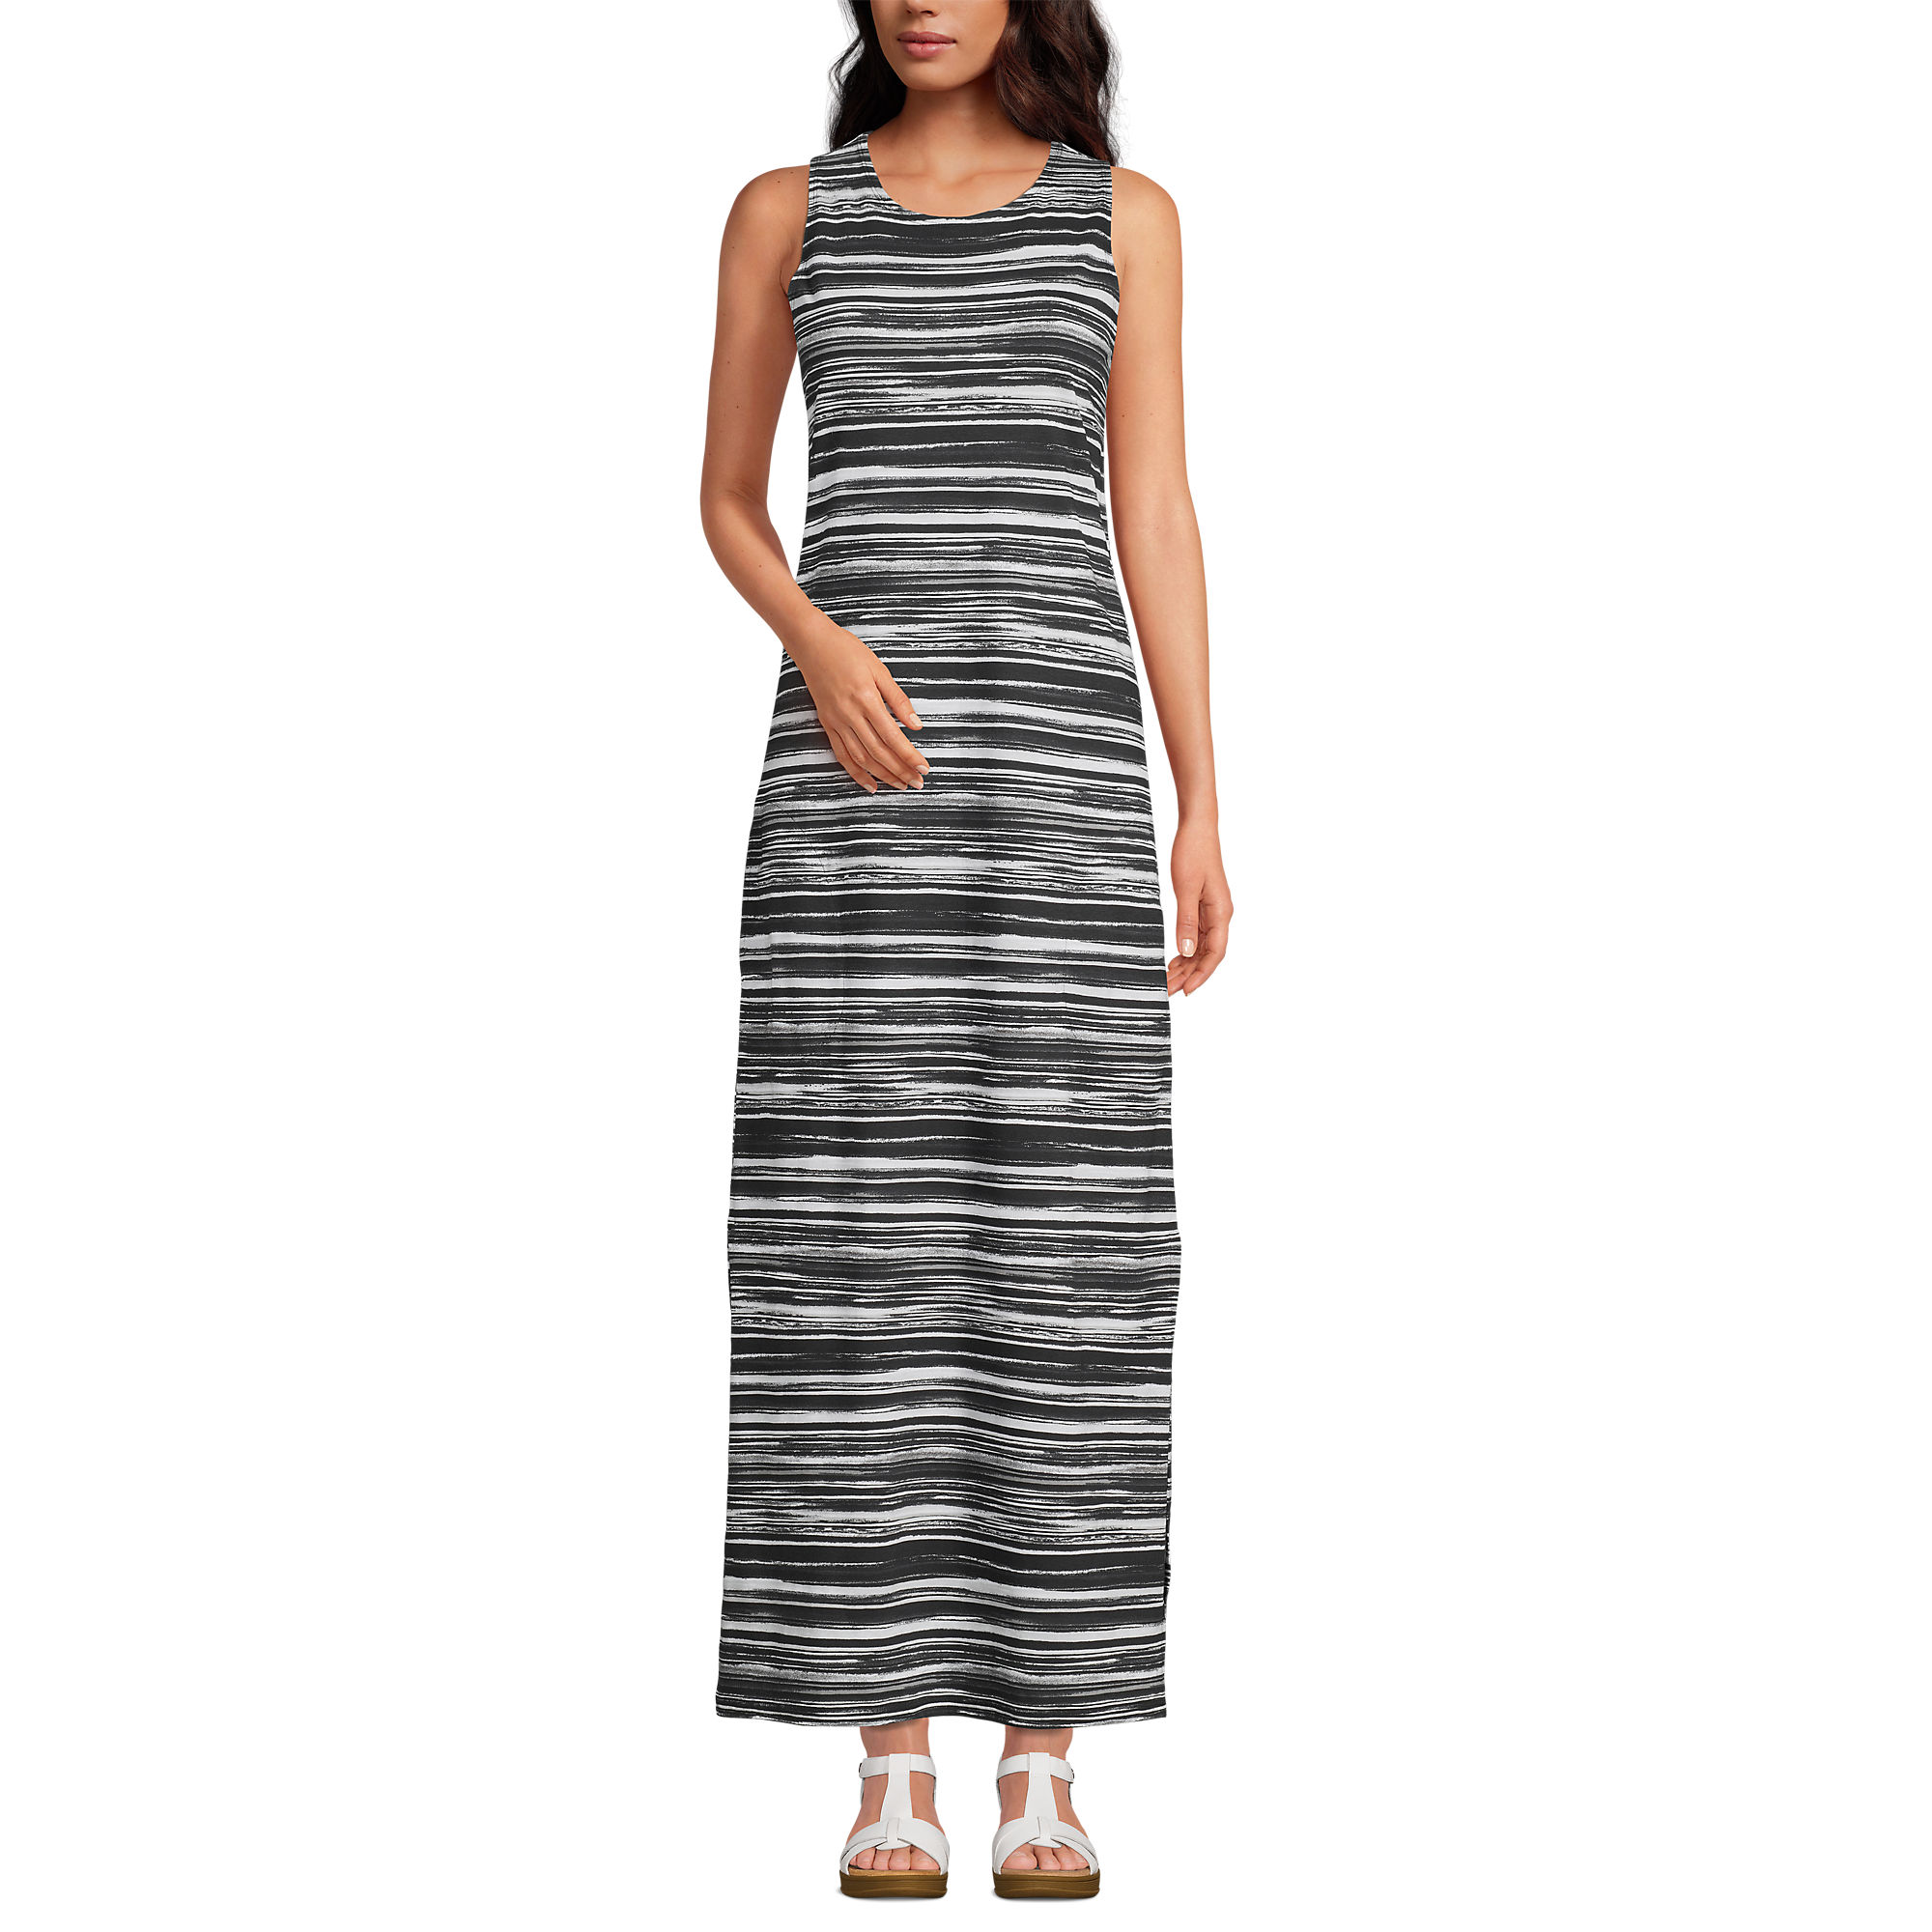 Lands End Women's Cotton Jersey Sleeveless Swim Cover-up Maxi Dress (Black/White Ombre)